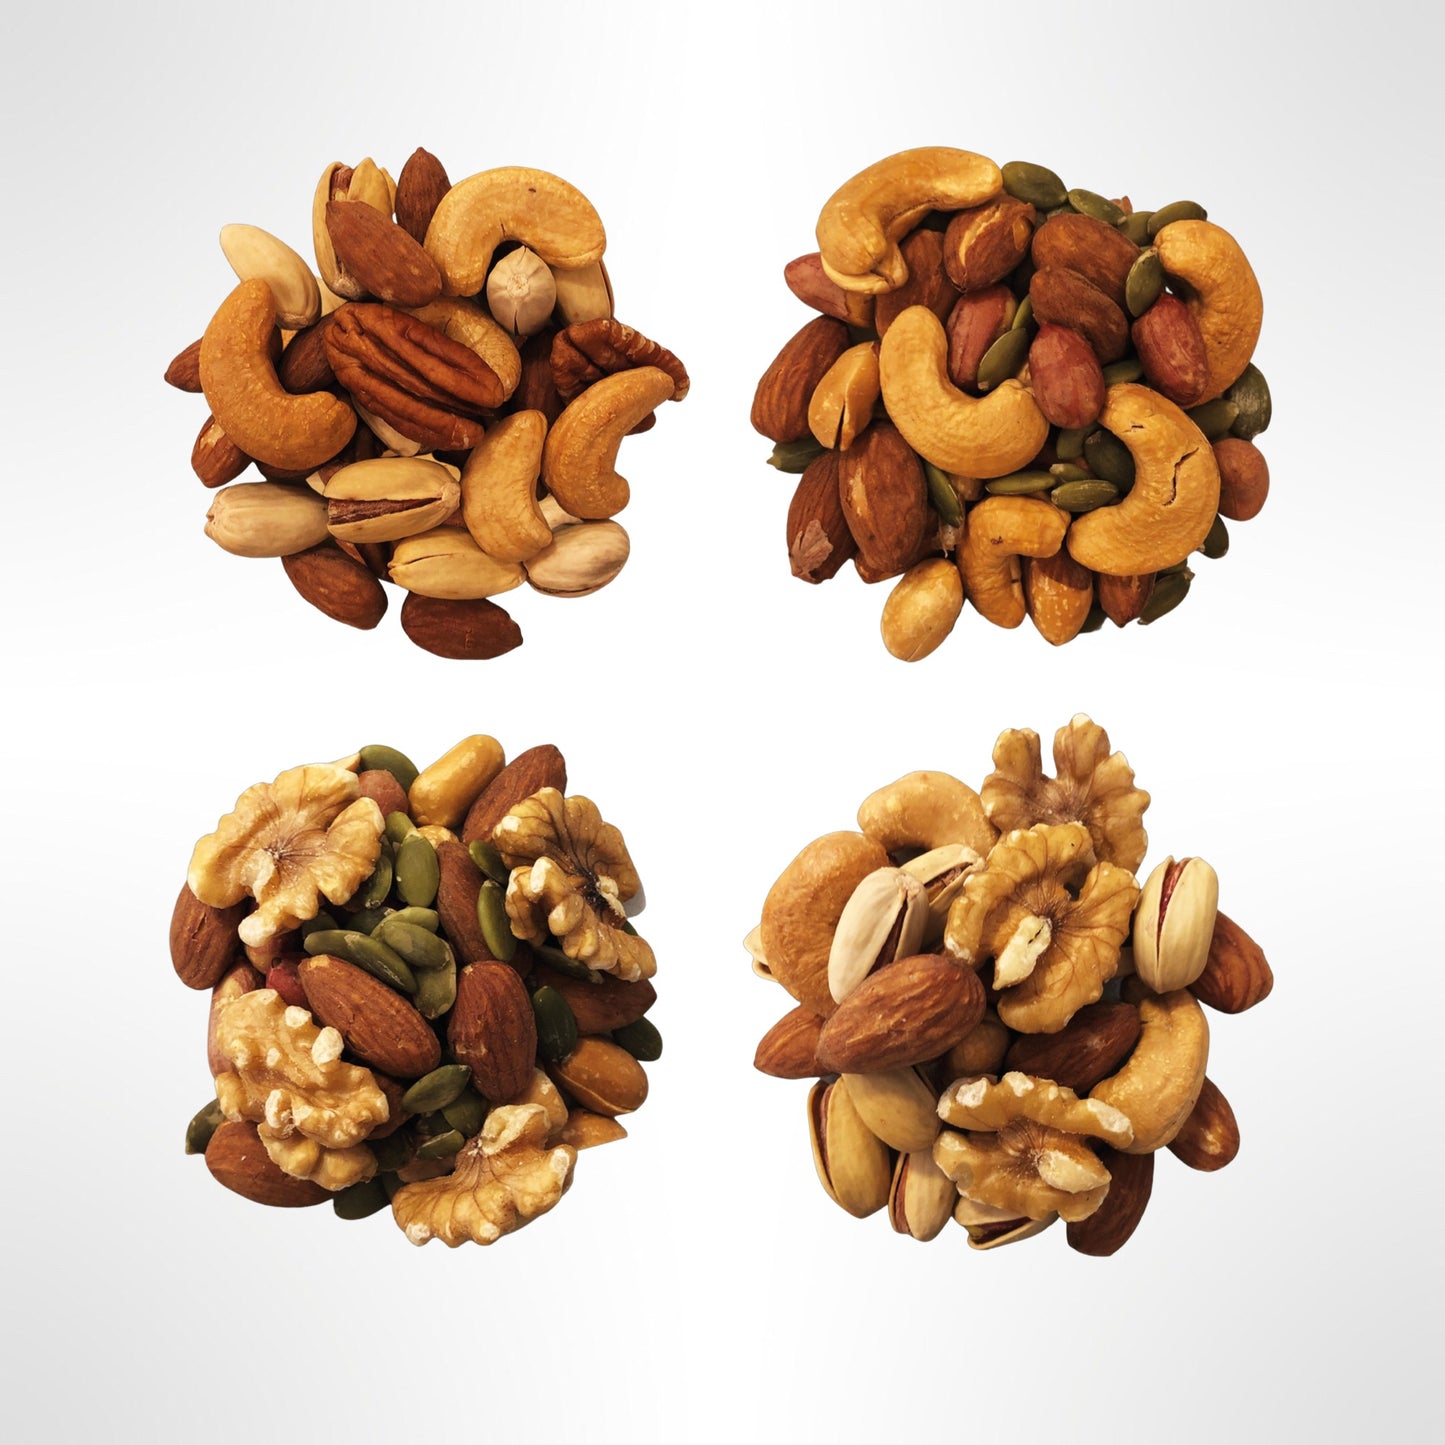 Snack On Nuts - Variety Pack - 4 Blends of Mixed Nuts with Premium Ingredients: Roasted Almonds, Cashews, Pistachios, Peanuts, Raw Pecans, Walnuts, and Pumpkin Seeds Snacks